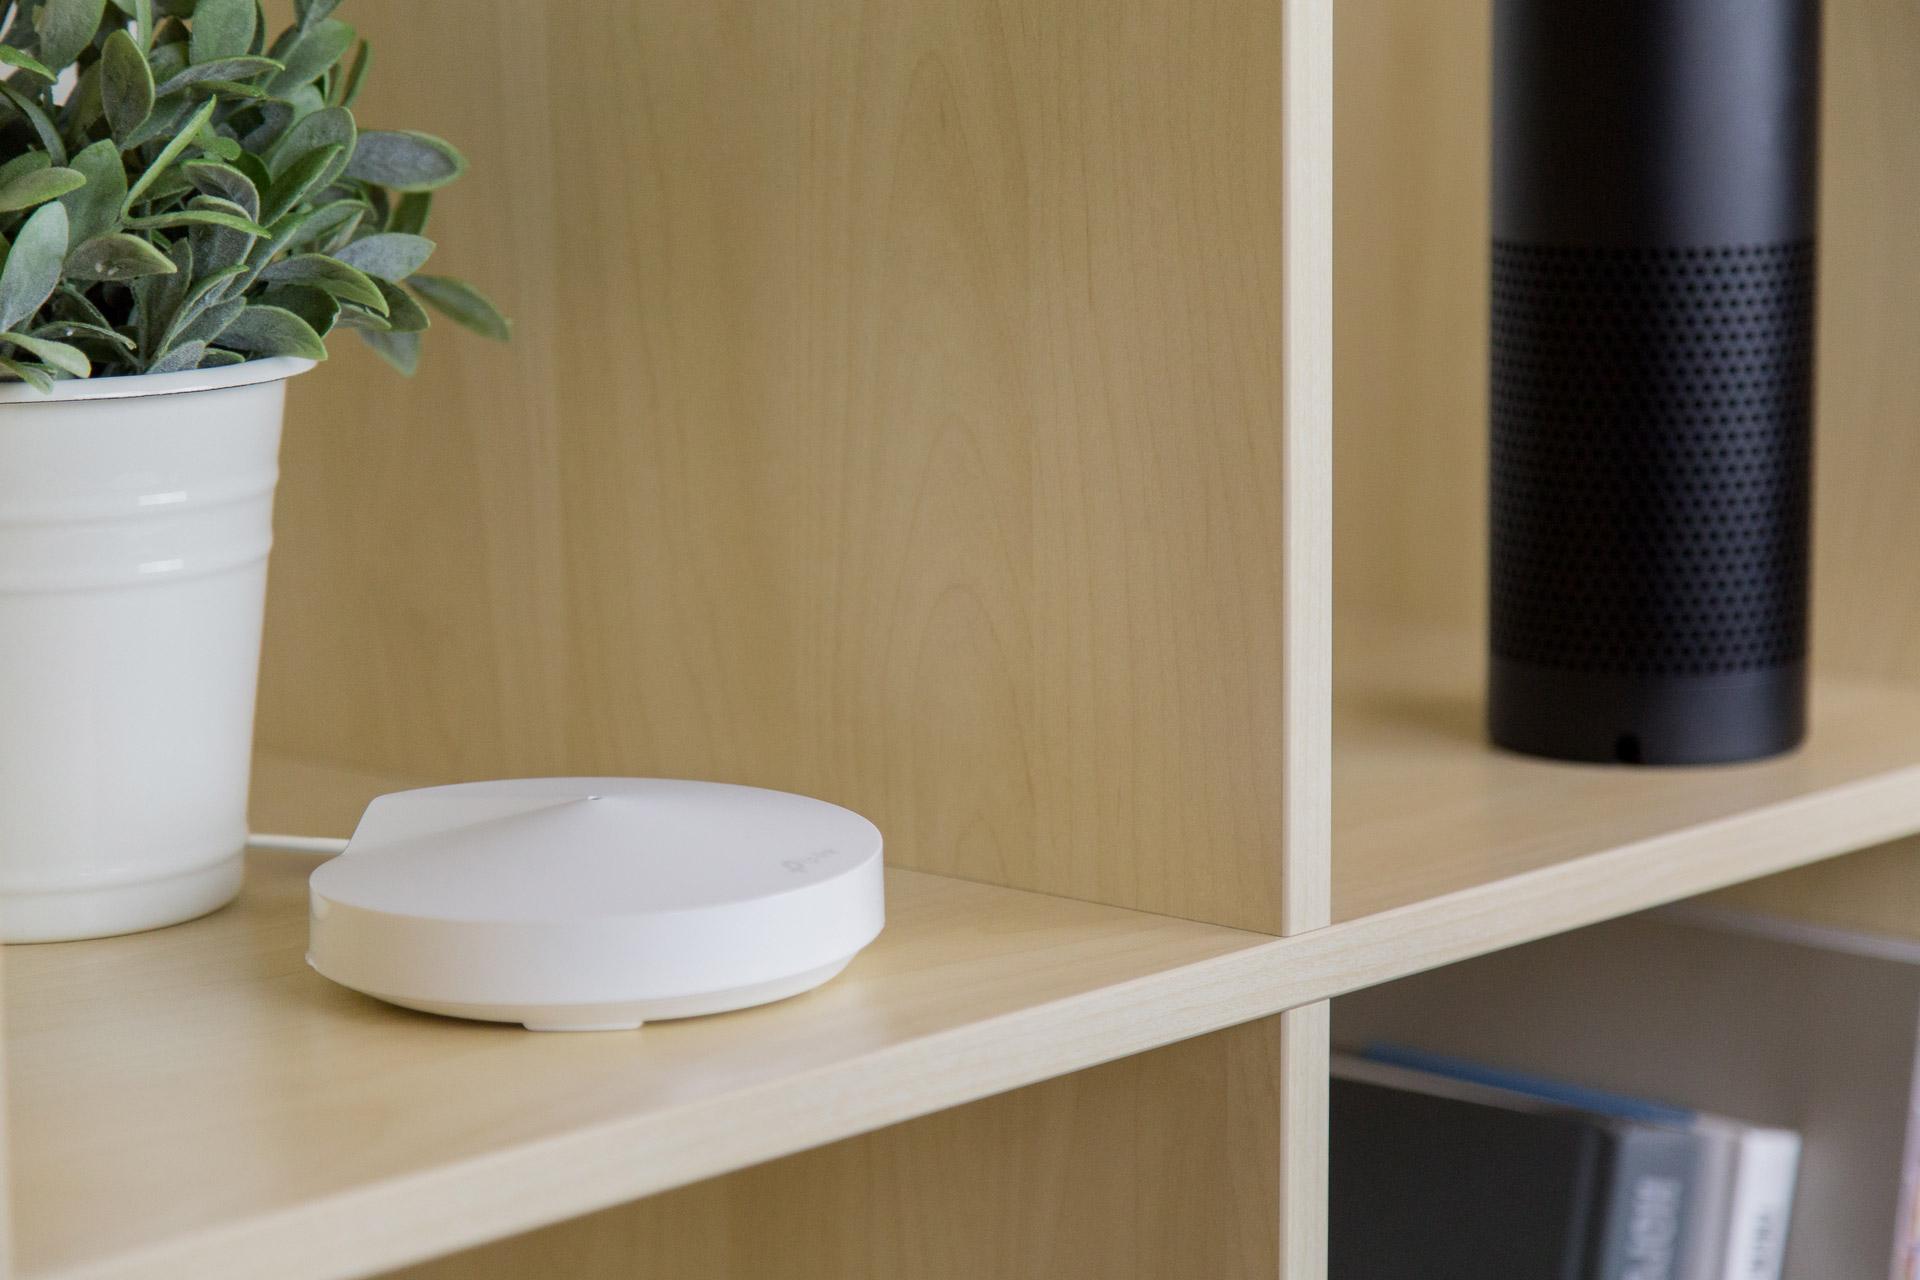 The TP-Link Deco M5 Mesh Router placed on a shelf